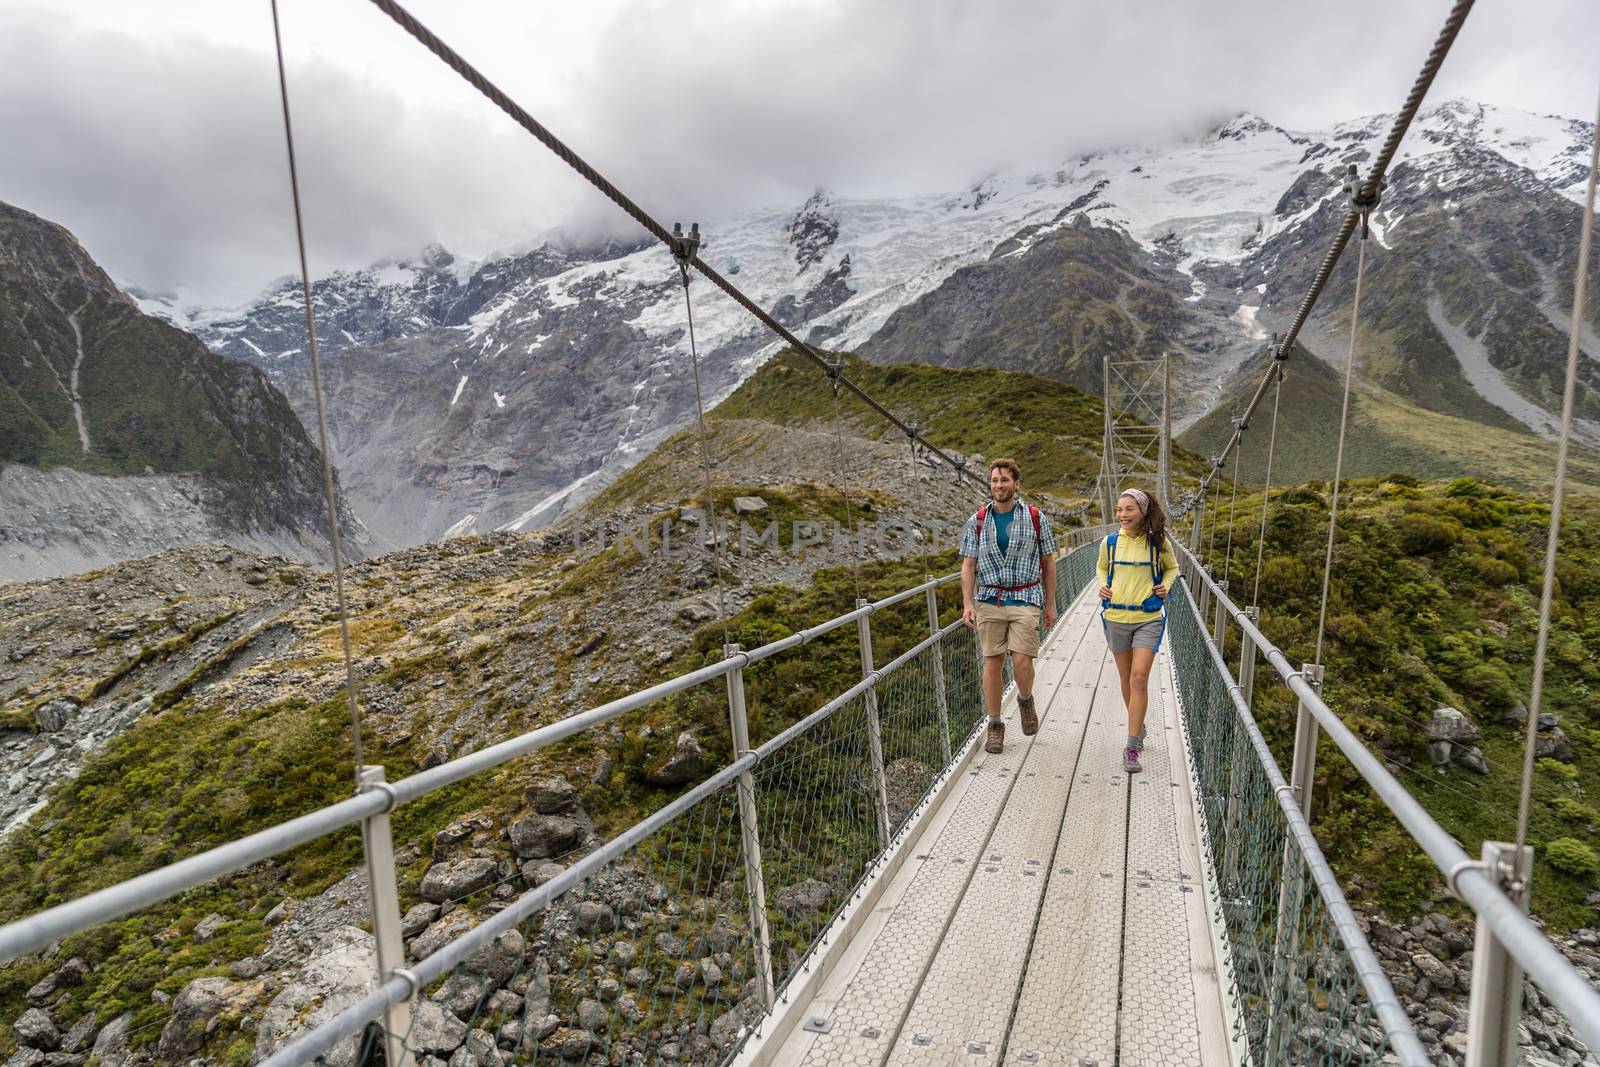 Hooker Valley Track hiking trail, New Zealand. Hikers people crossing bridge on the Hooker Valley track, Aoraki, Mt Cook National Park with snow capped mountains landscape by Maridav